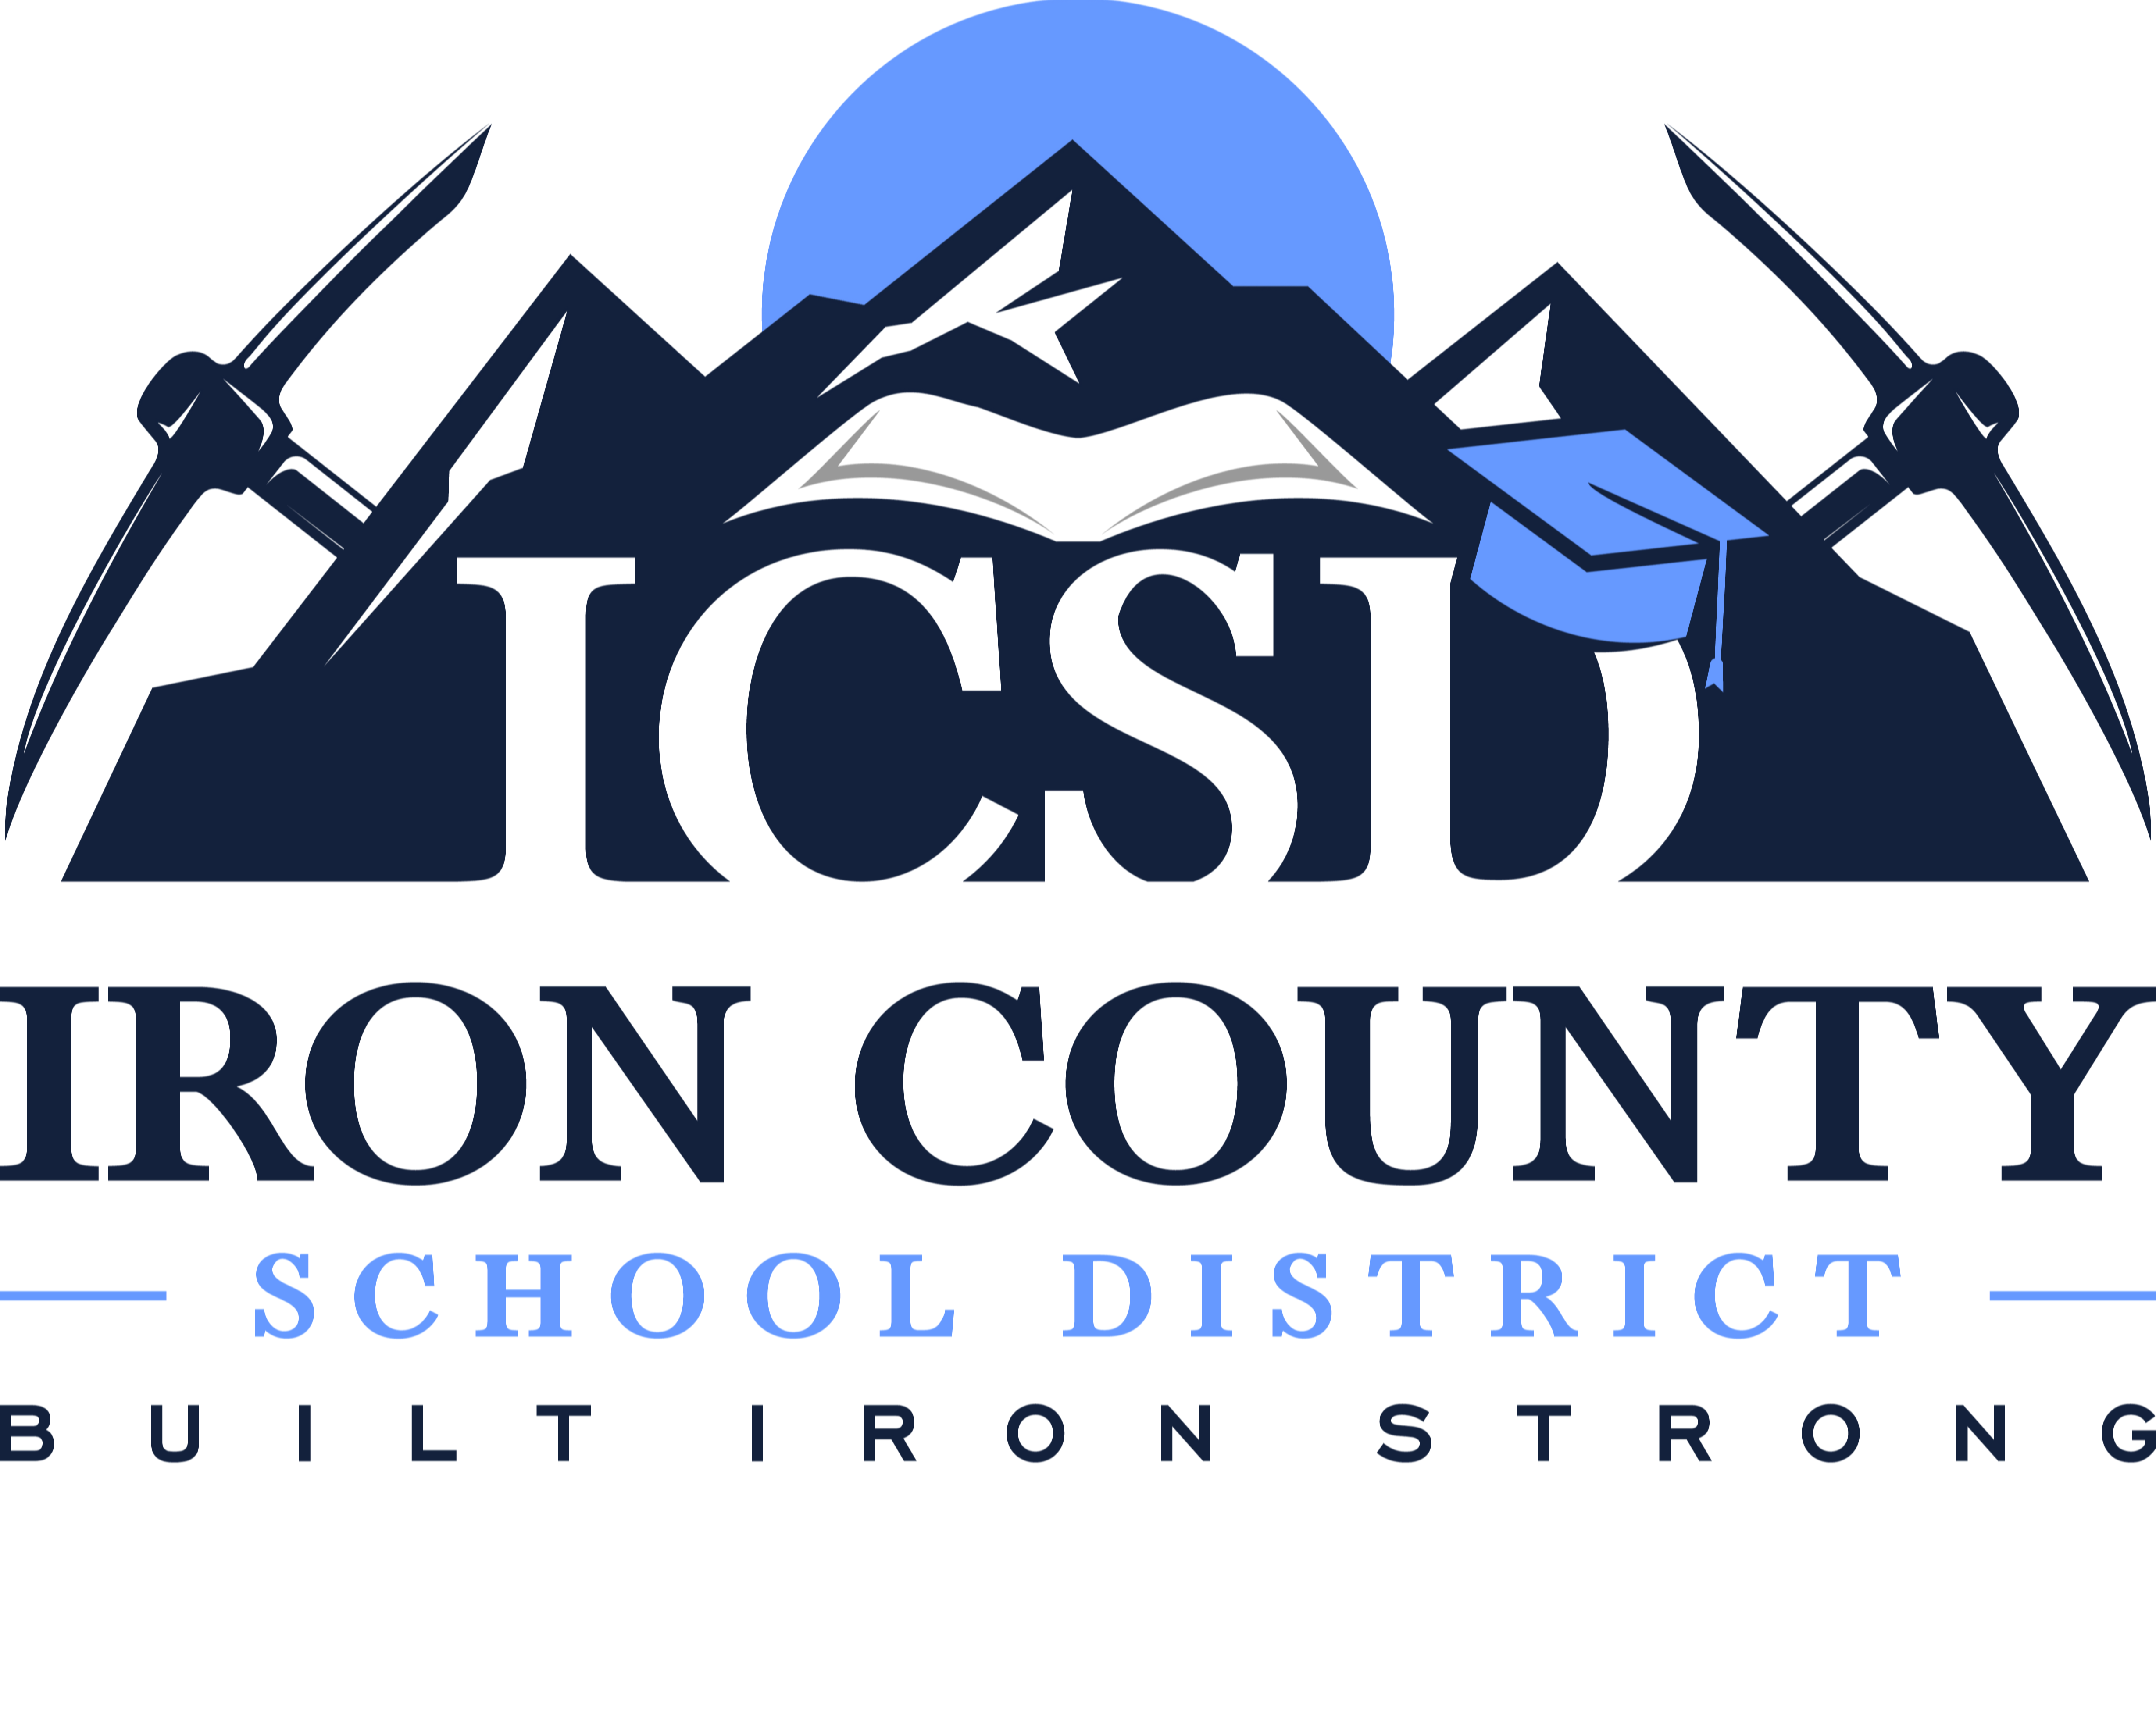 Iron County School District, Built Iron Strong